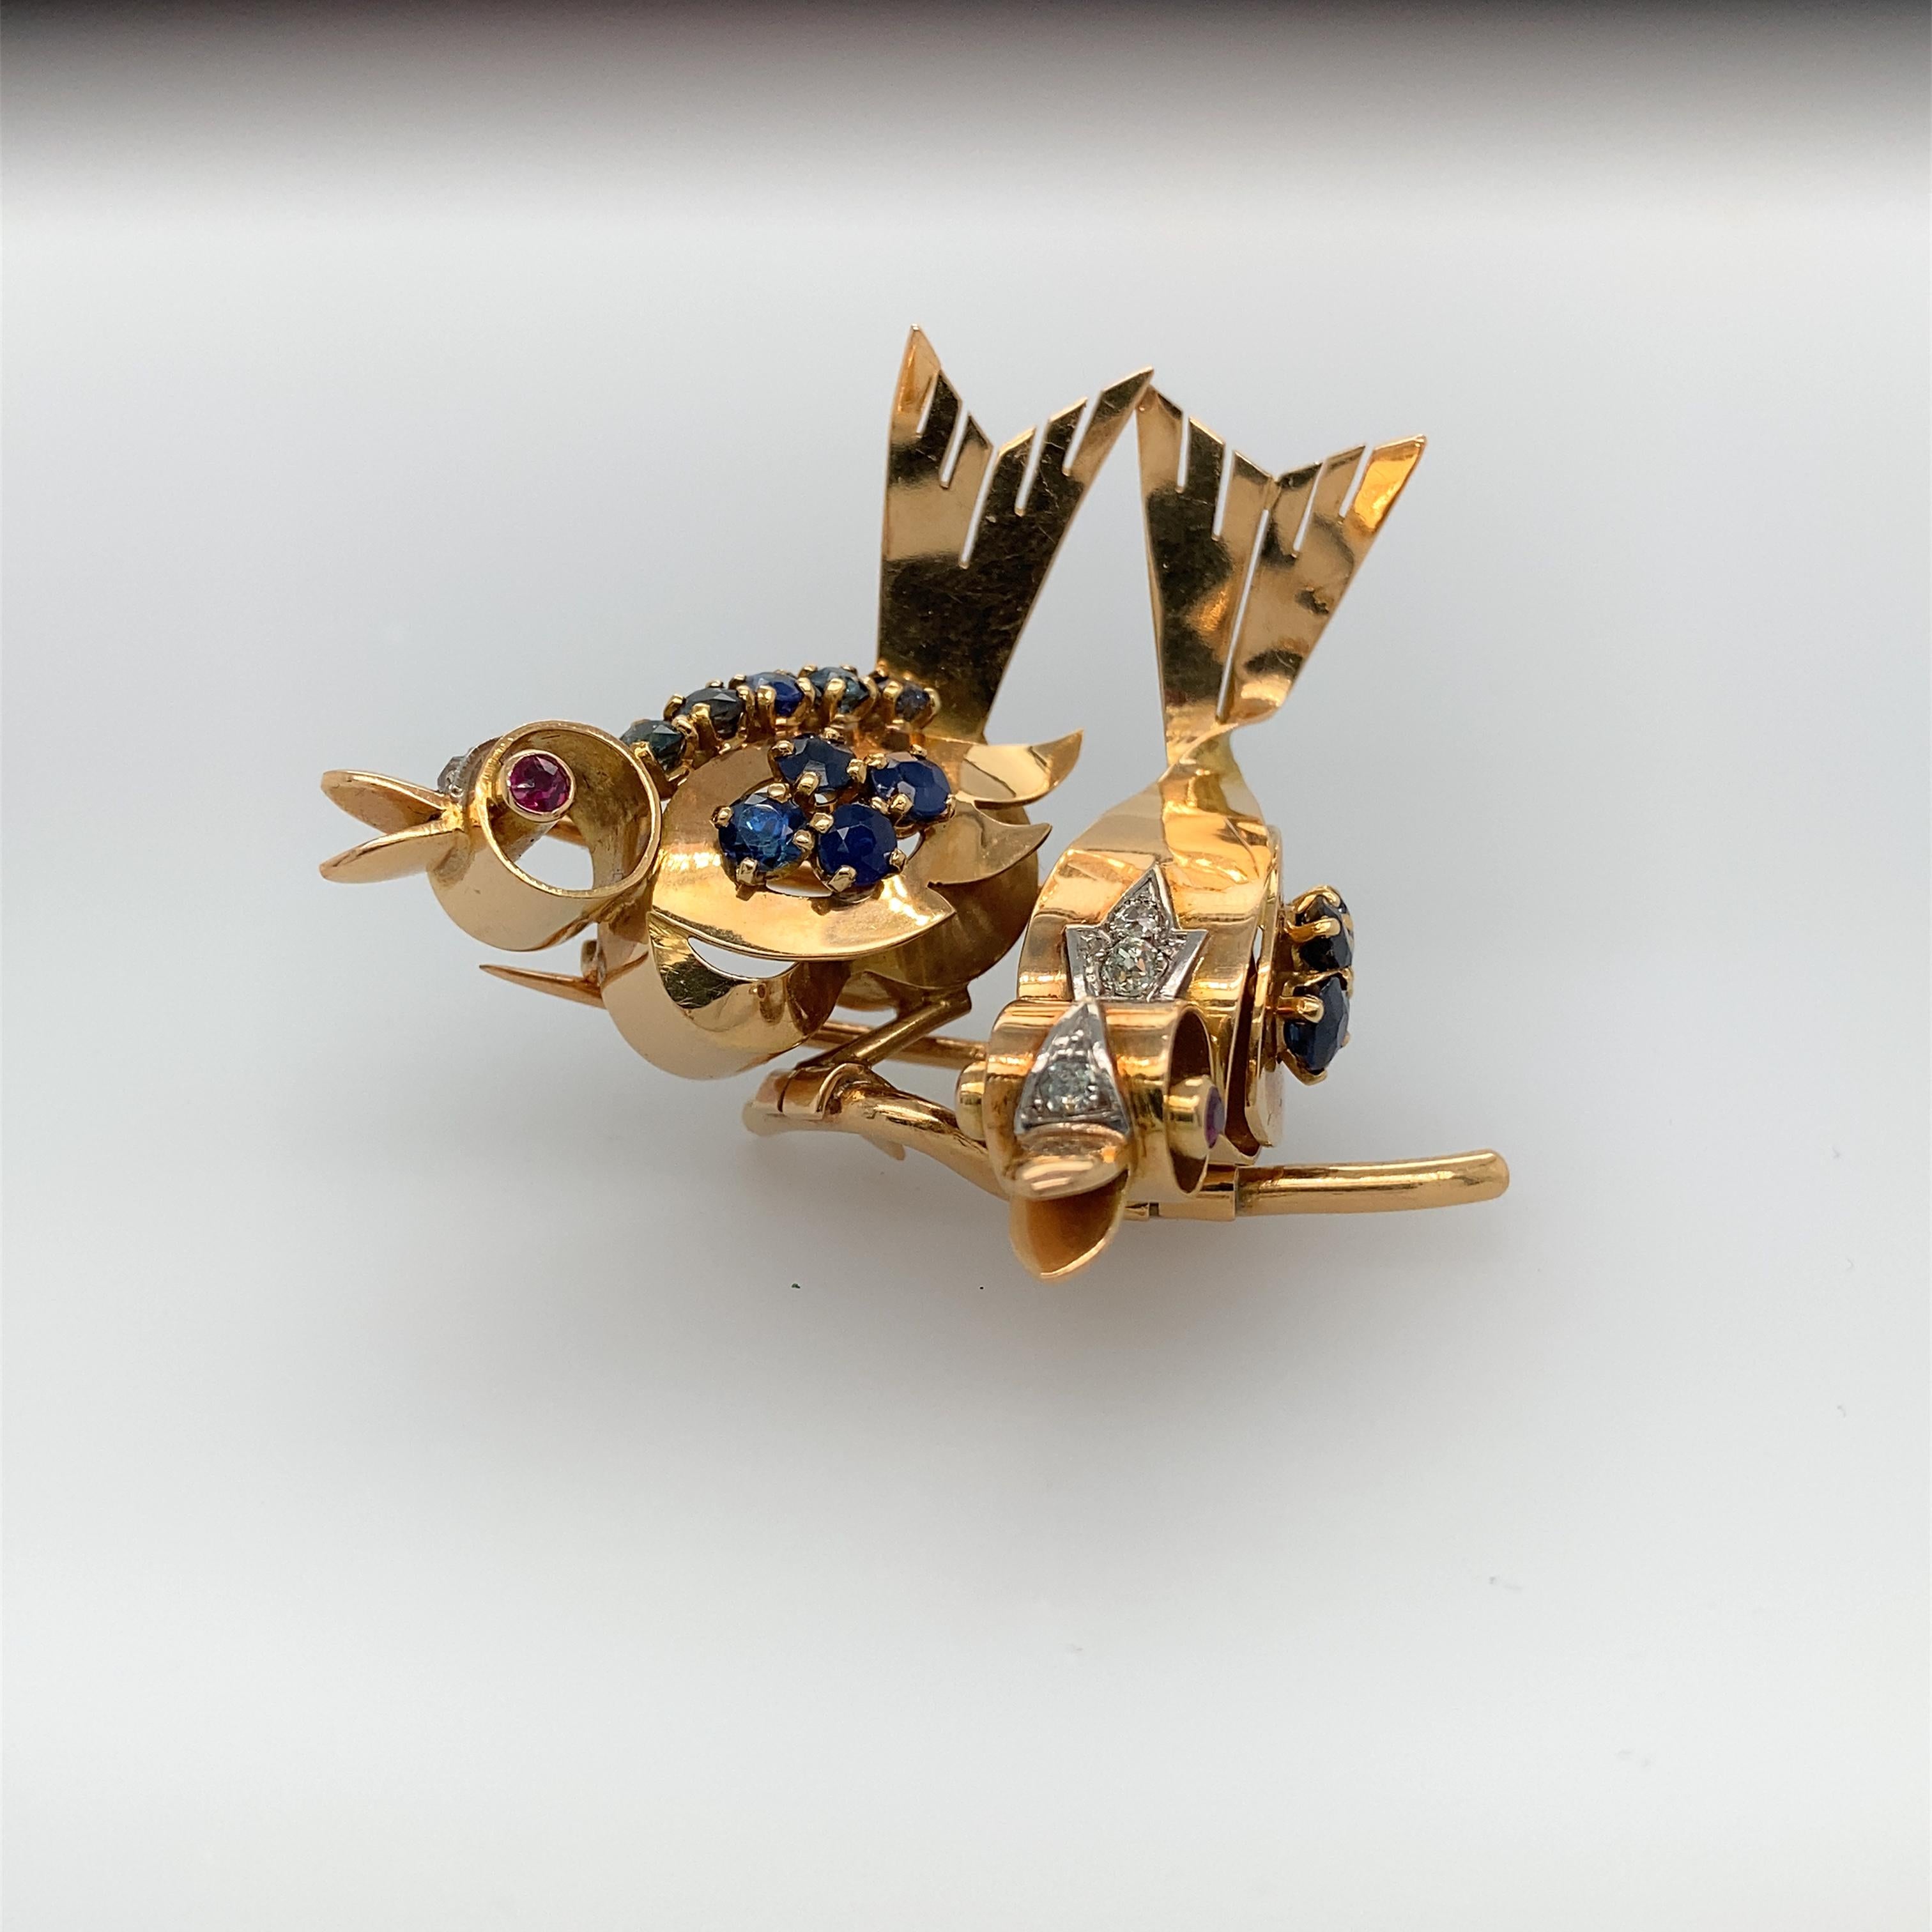 A delightful two-bird brooch attributed to Mauboussin, in 18K yellow gold, the bodies of the two singing birds accentuated with 13 sapphires and small diamonds in platinum, the eyes set with rubies.
With maker's mark C&T and French assay